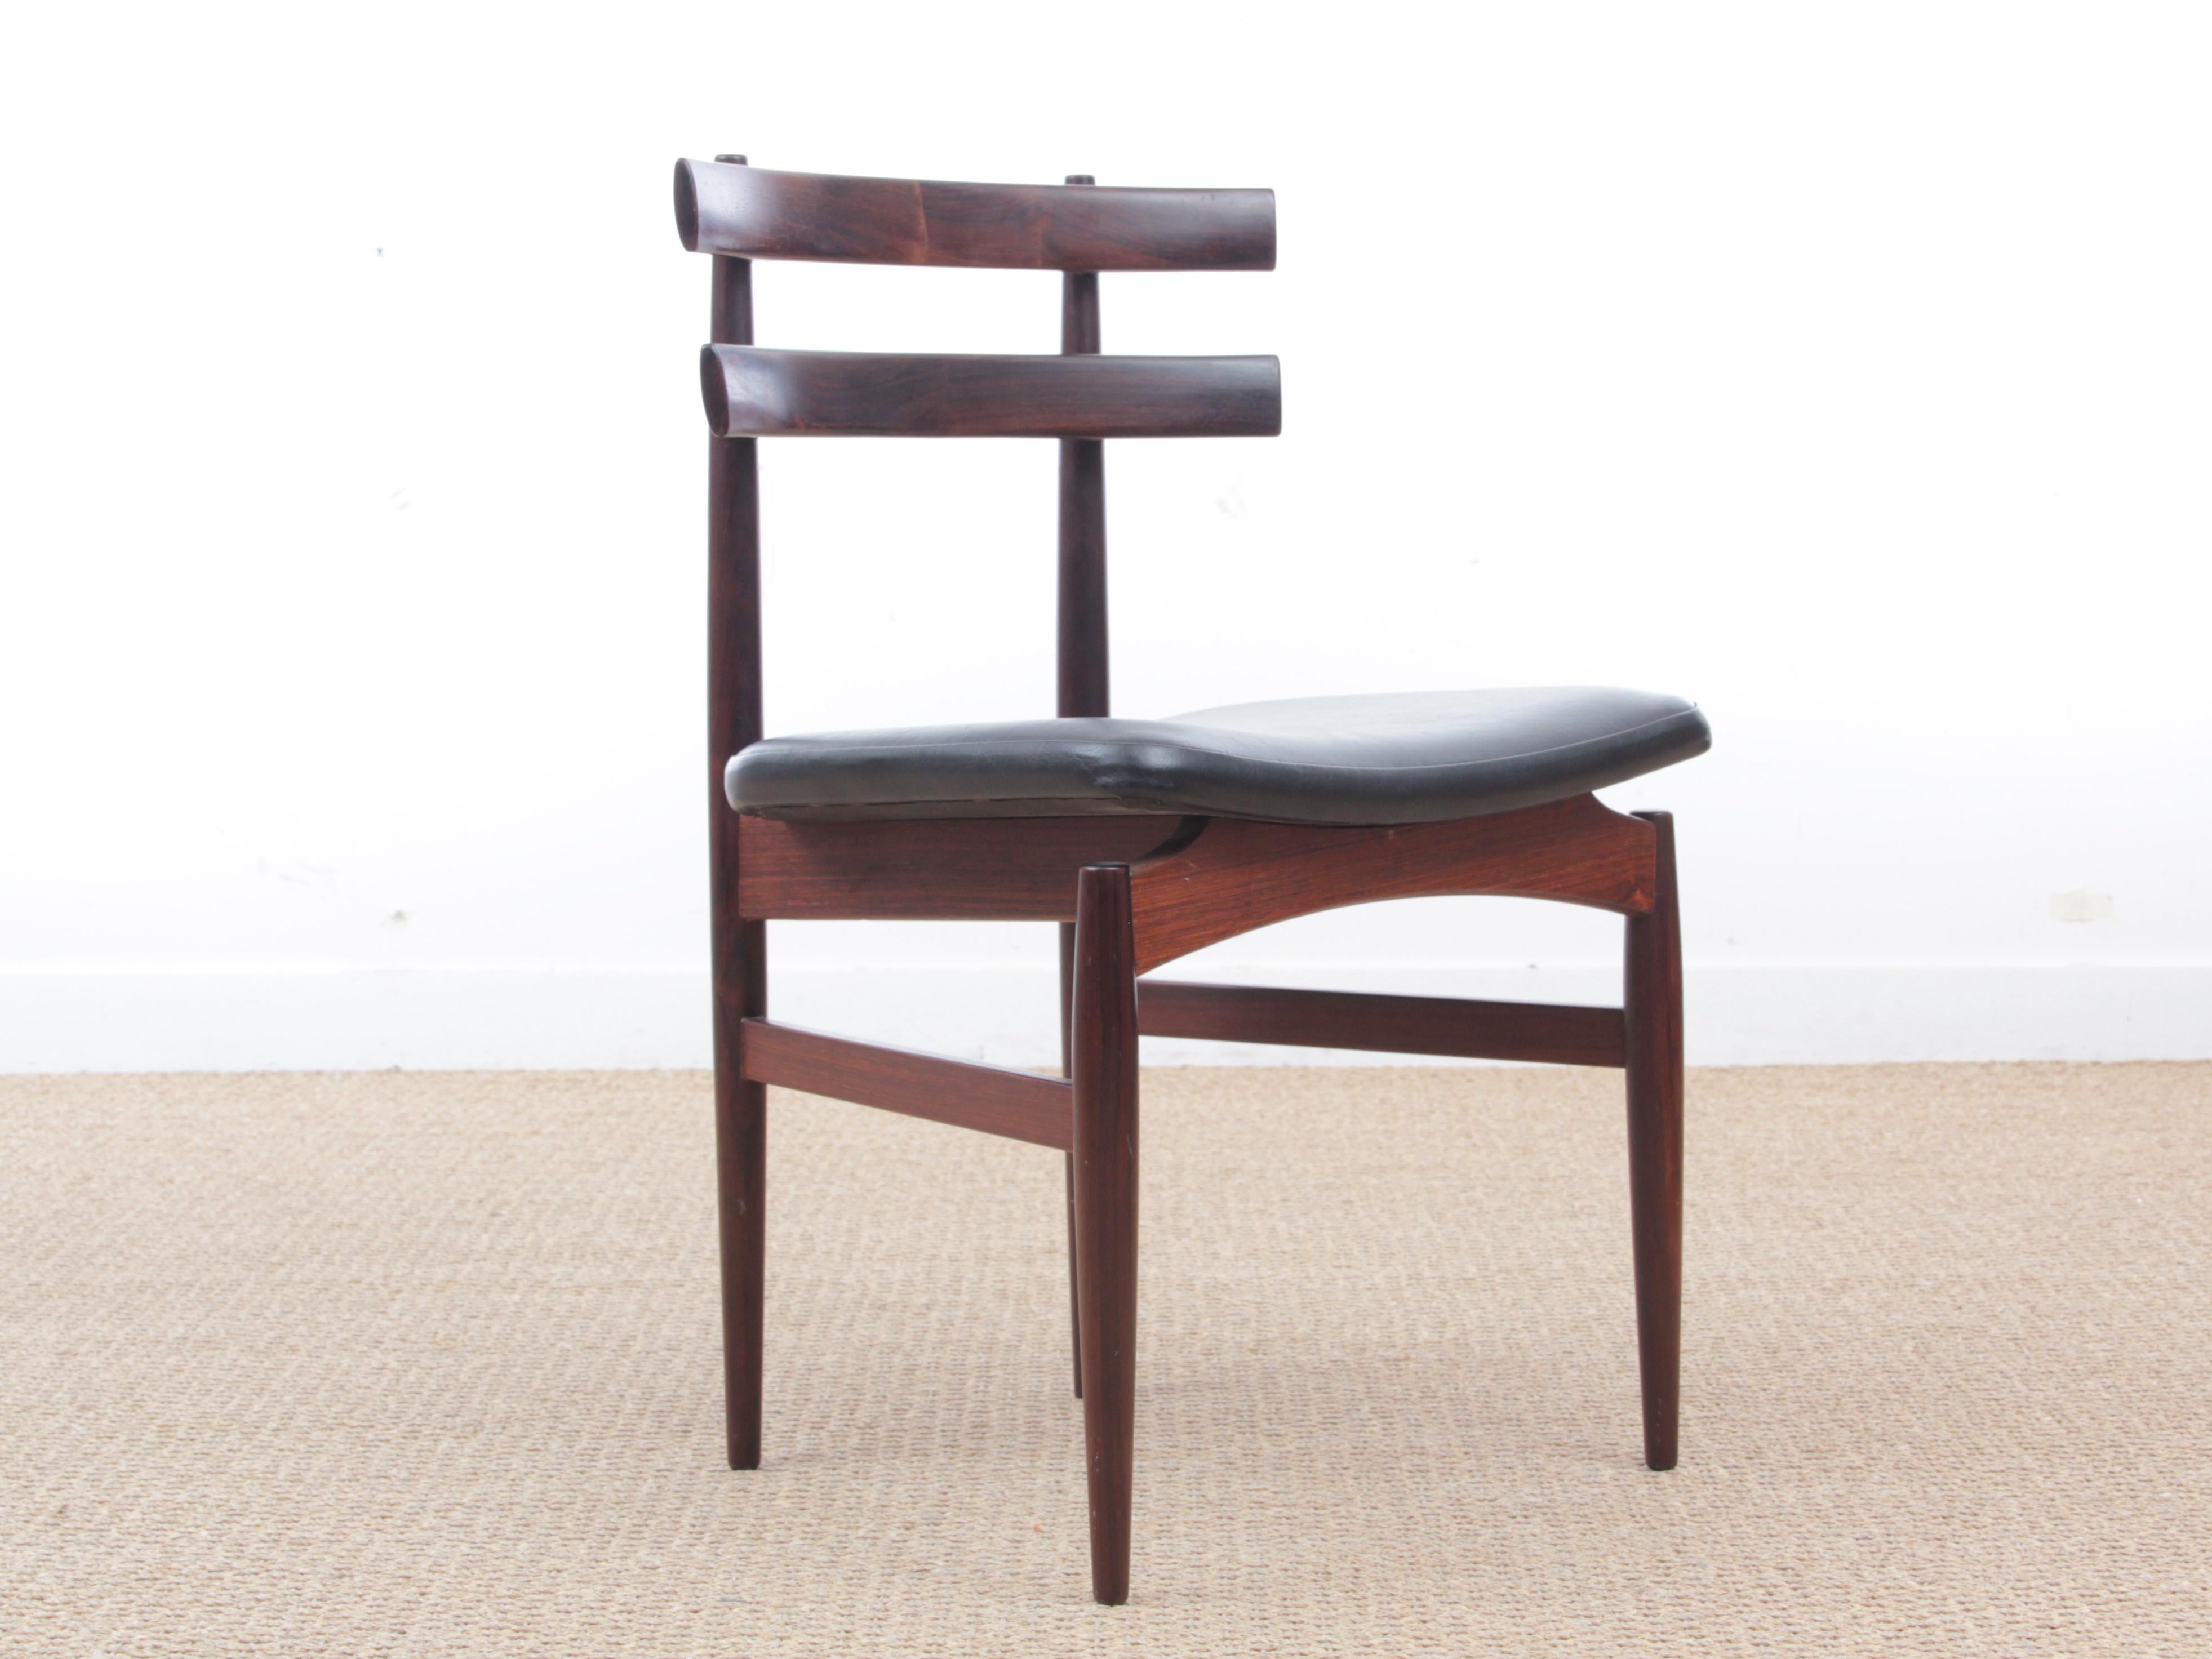 Mid-Century Modern Danish set of four chairs in rosewood by Poul Hundevad. Original upholstery in simili leather. Referenced by the Design Museum Denmark under number RP00757.